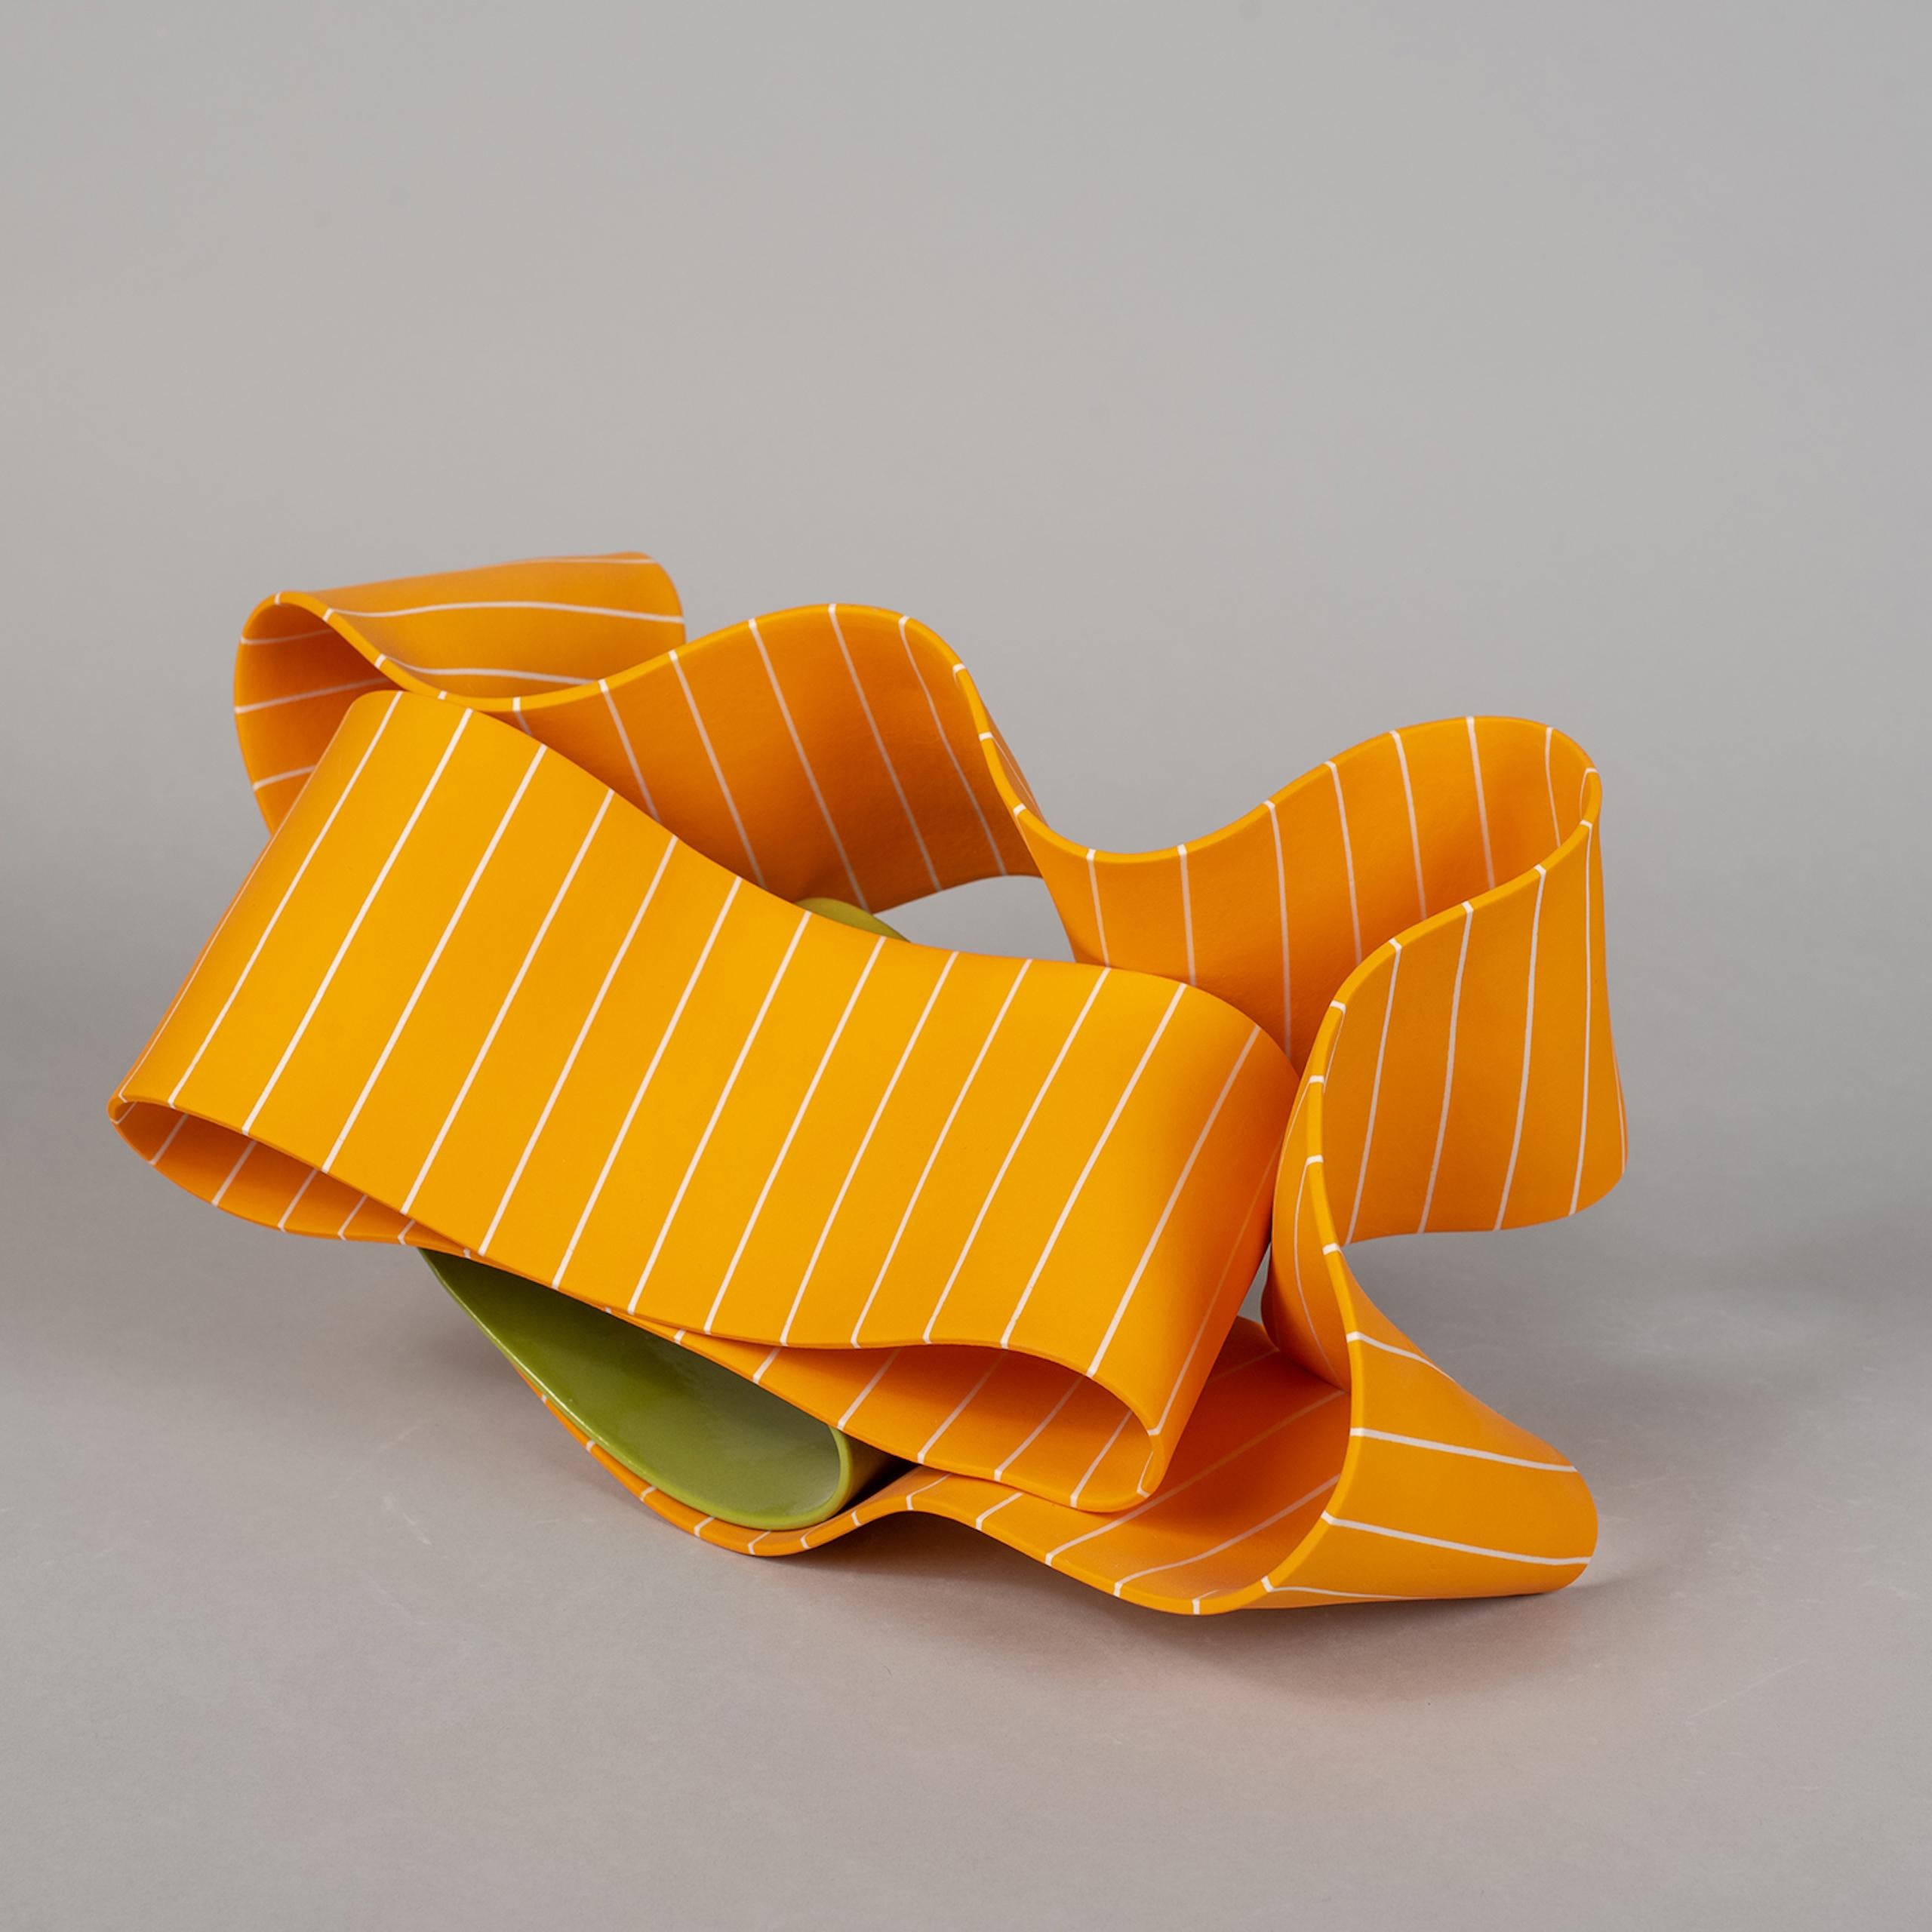 Folding in Motion 6 is a unique paper porcelain sculpture by contemporary artist Simcha Even-Chen, dimensions are 20 × 32 × 20 cm (7.9 × 12.6 × 7.9 in). The sculpture is signed and comes with a certificate of authenticity.

This sculpture is a part